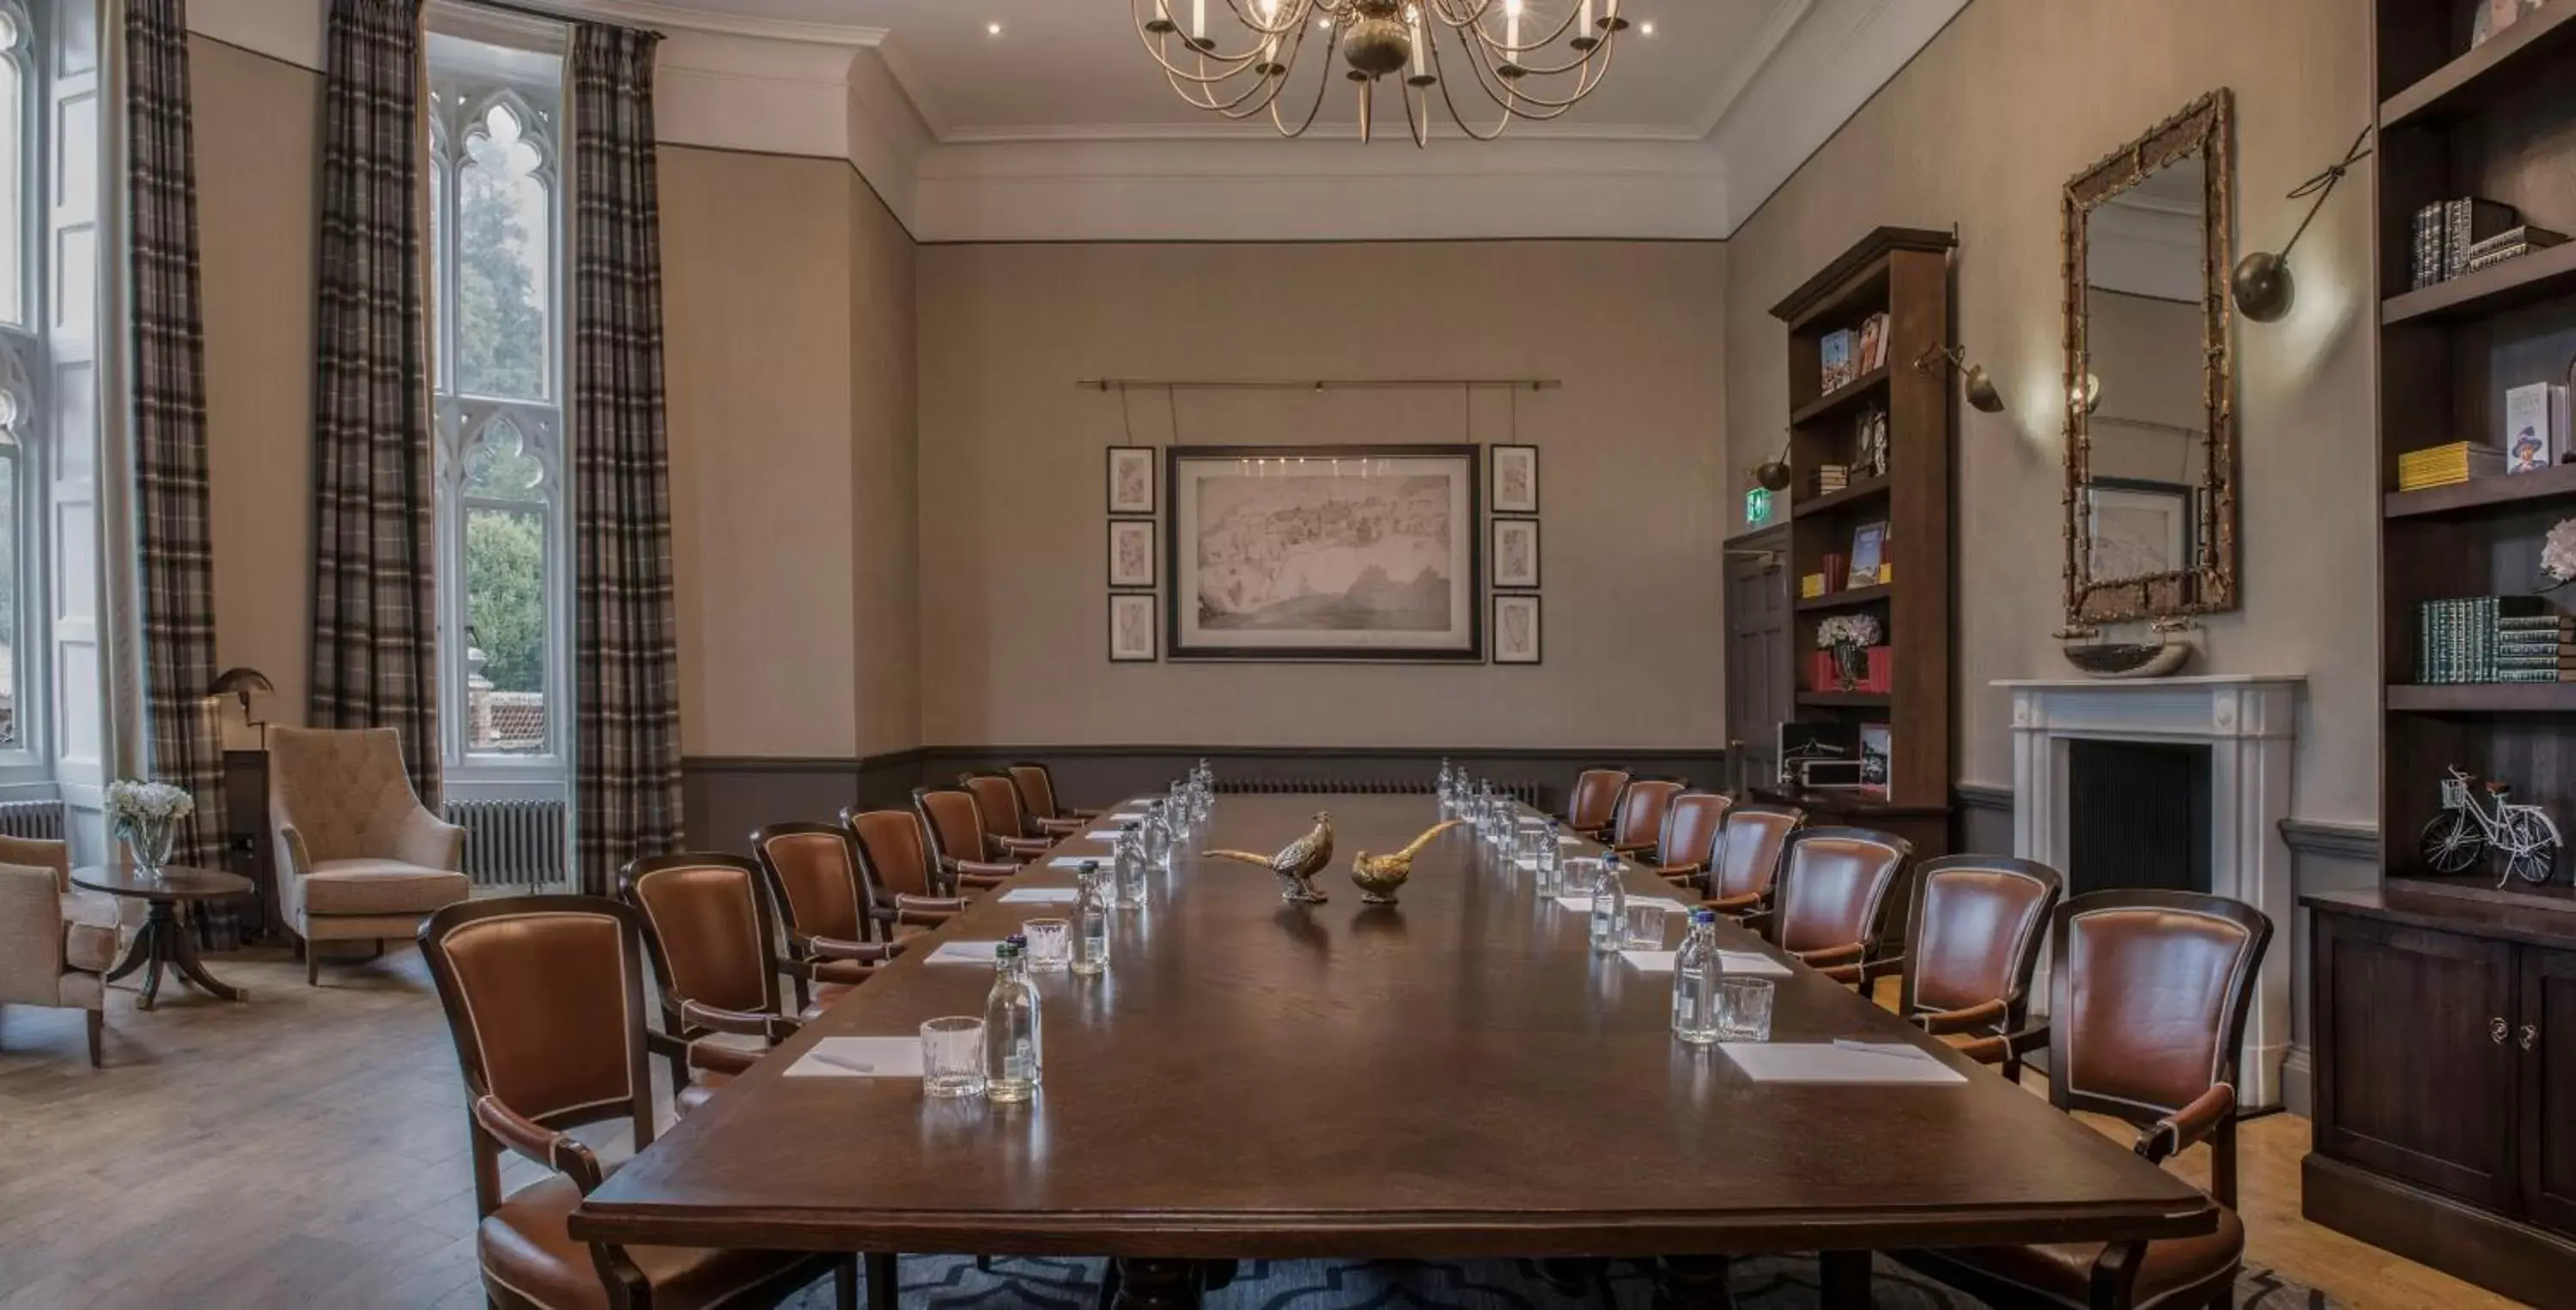 Meeting/conference room in Wotton House